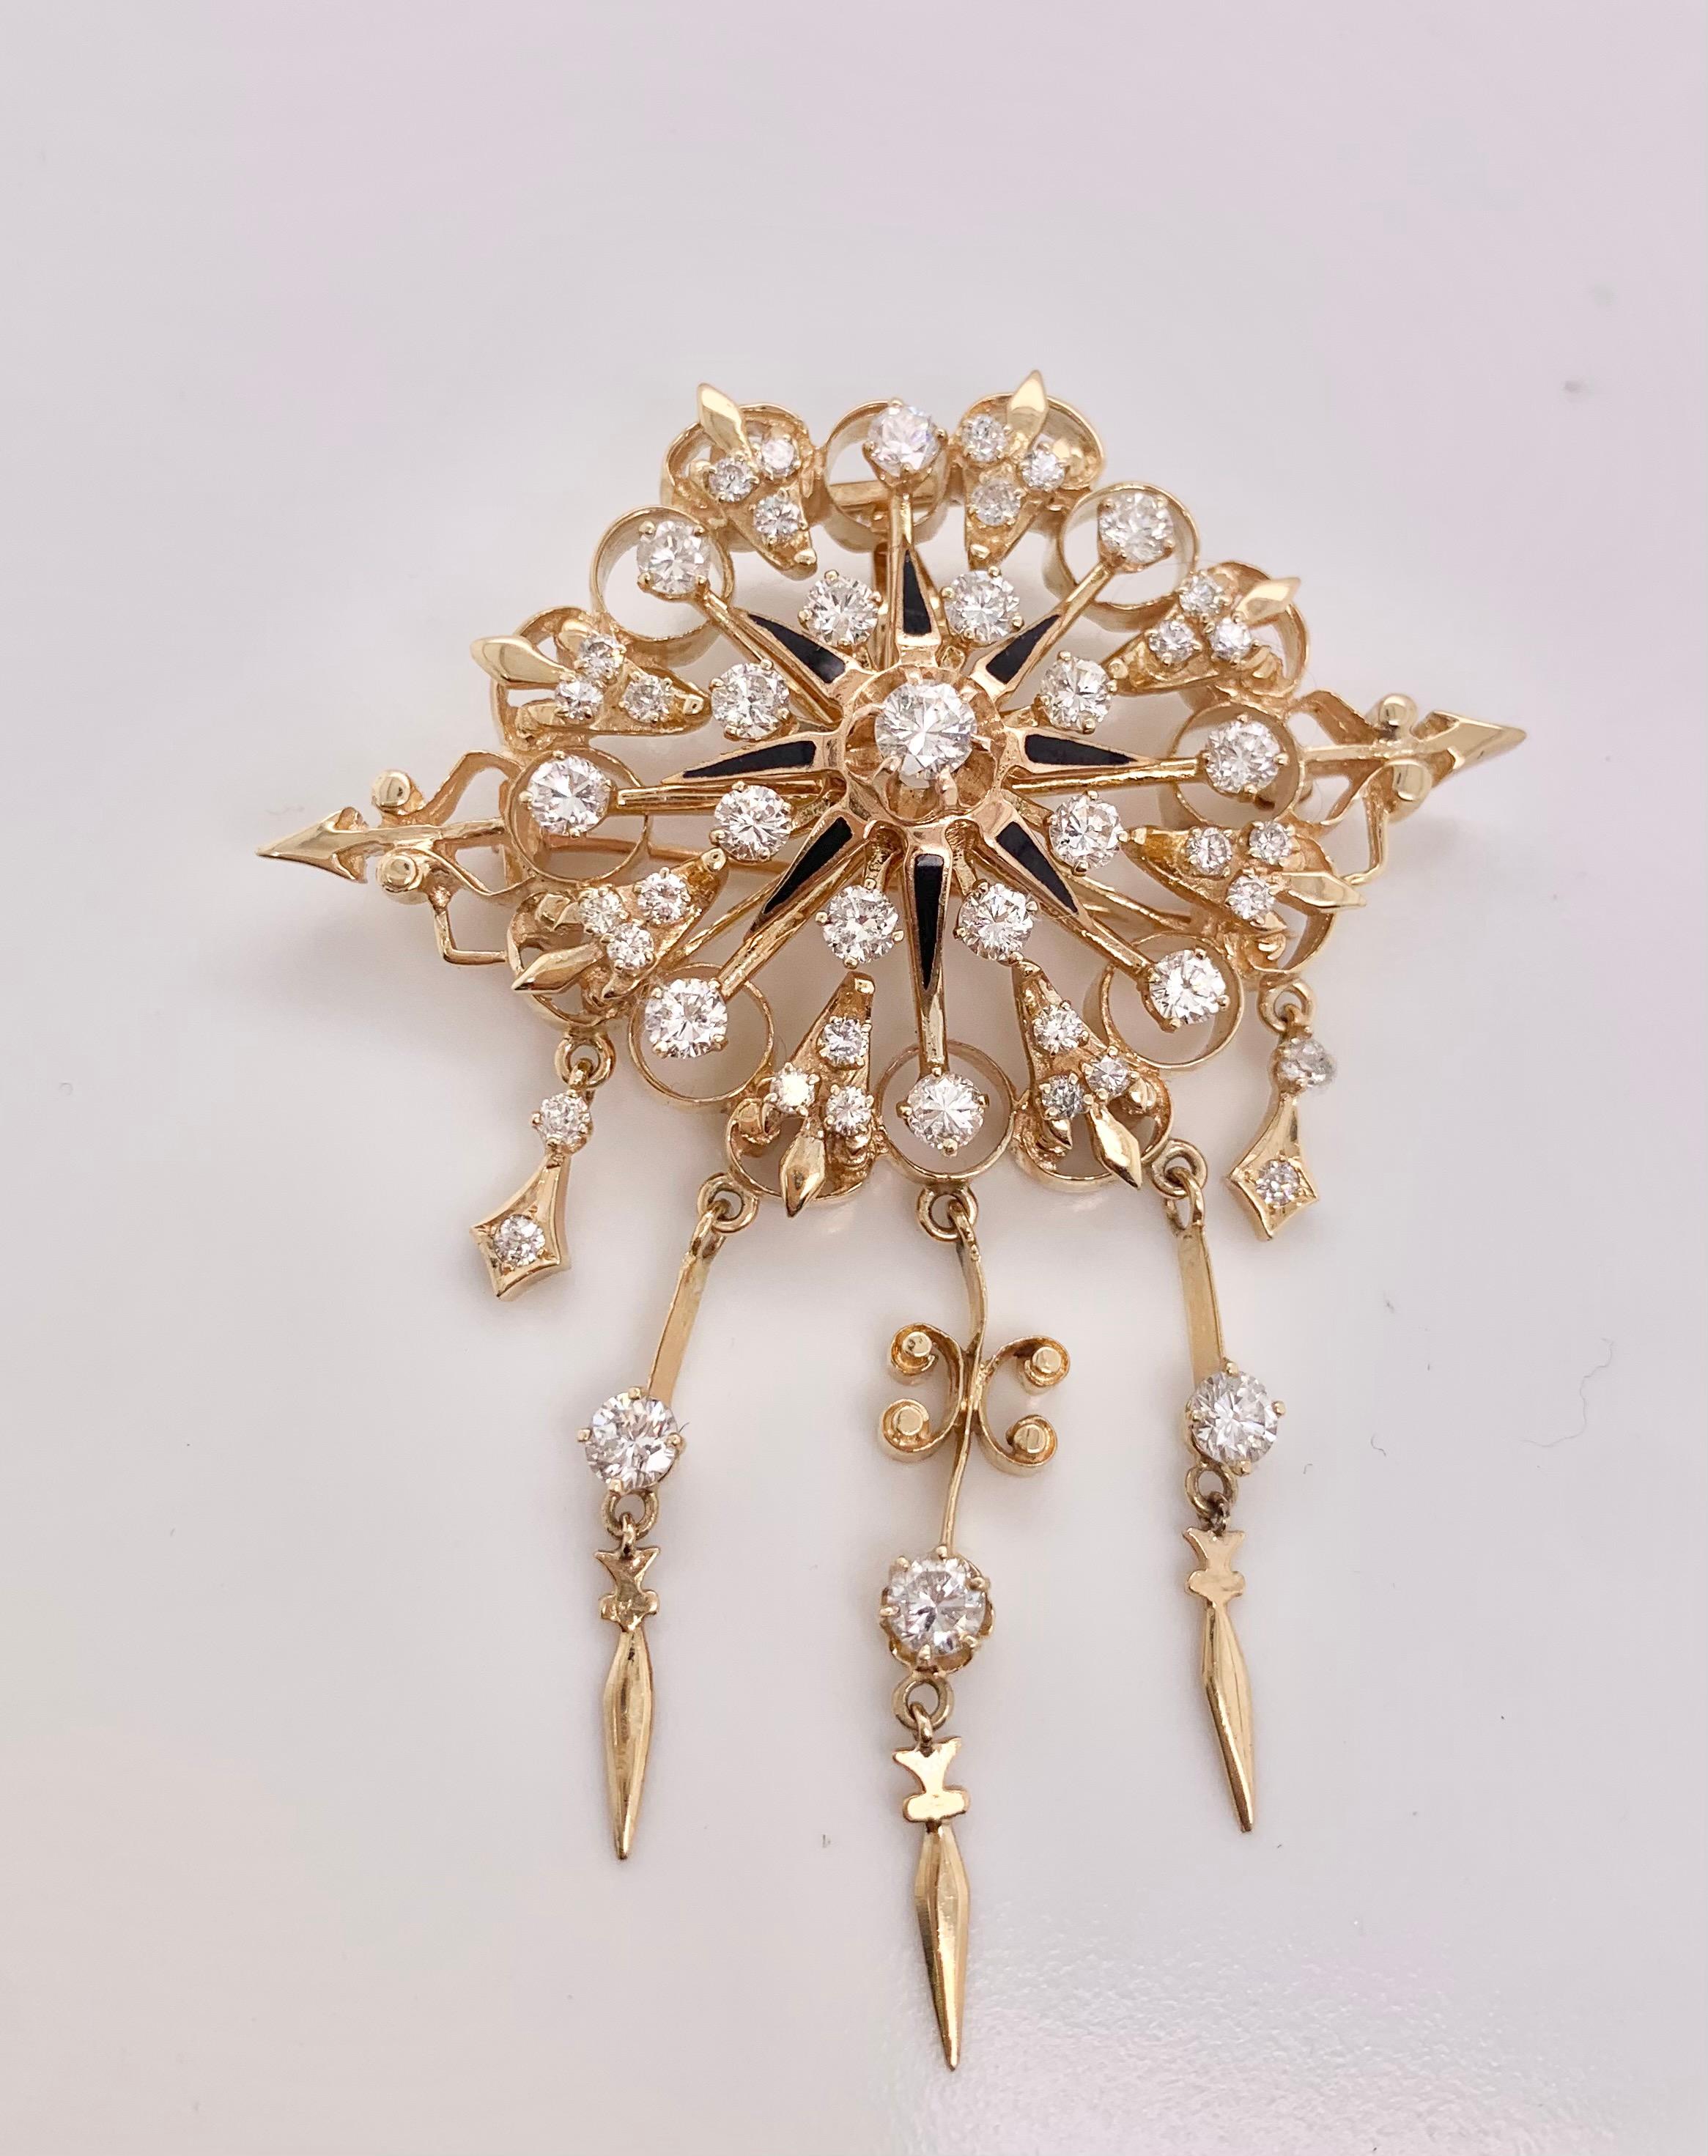 Artisan Celestial Diamond and Enamel Brooch and Pendant For Sale